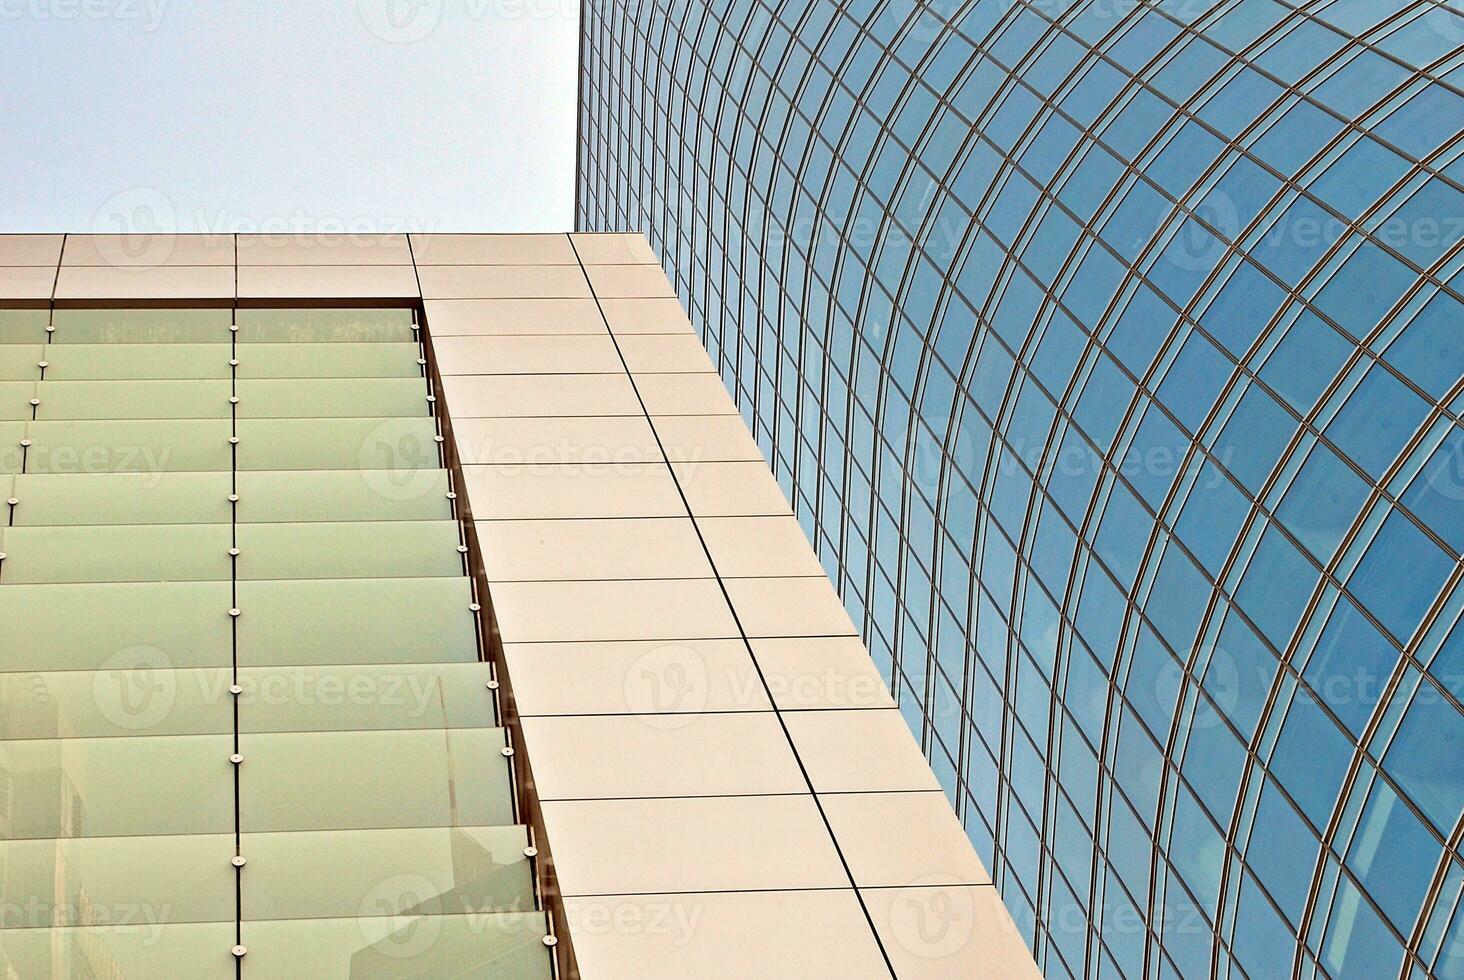 Structural glass wall reflecting blue sky. Abstract modern architecture fragment. photo